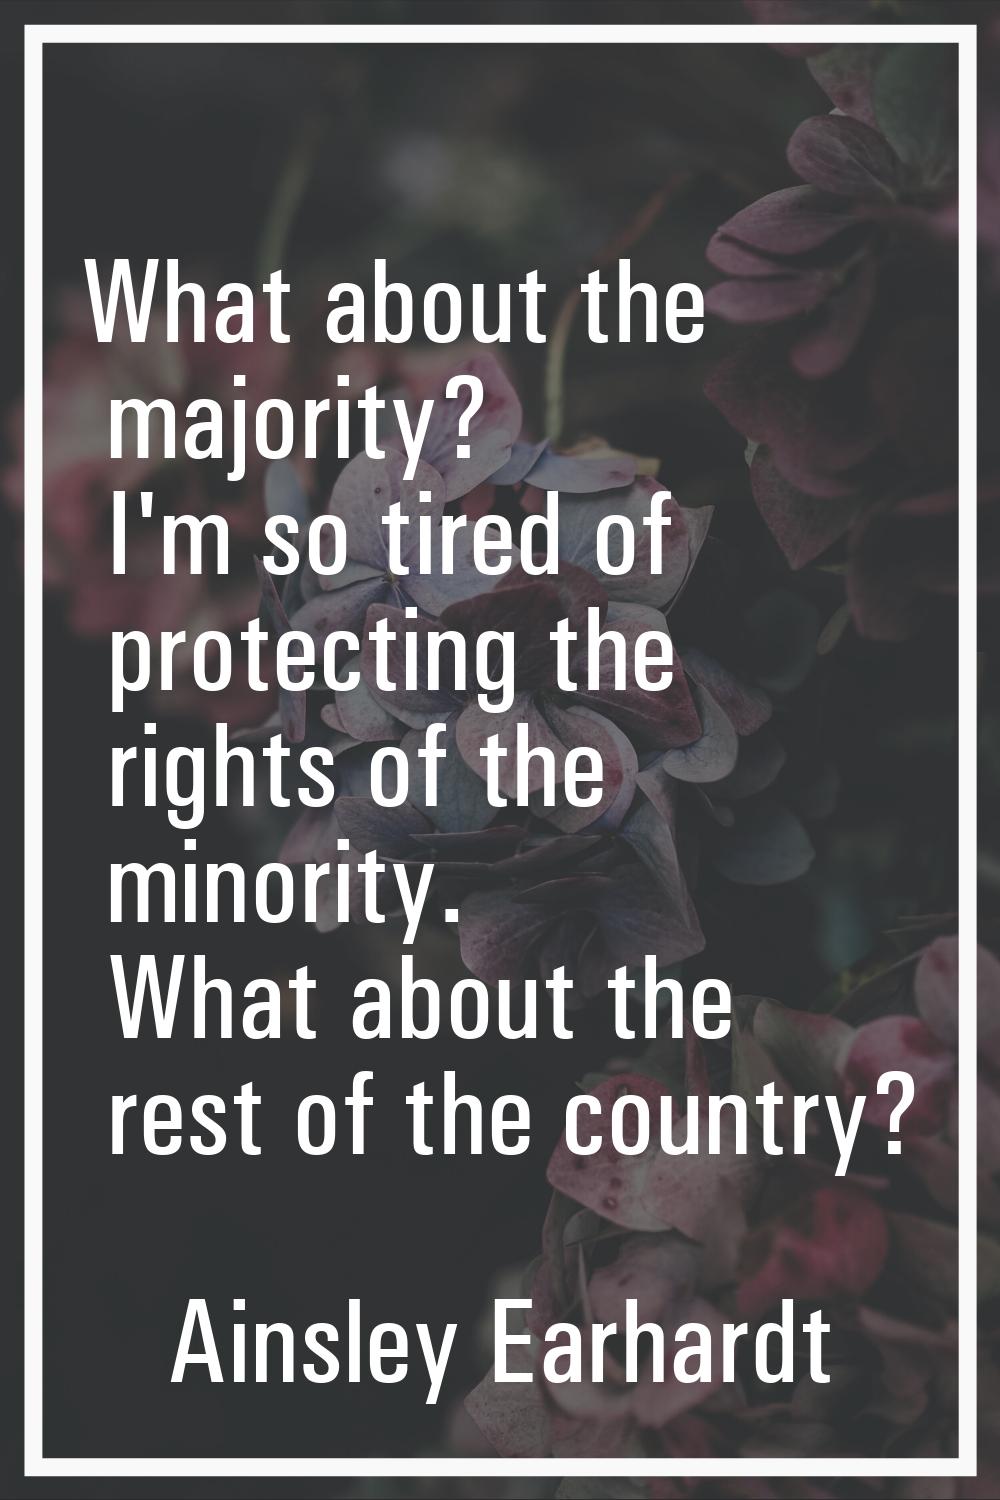 What about the majority? I'm so tired of protecting the rights of the minority. What about the rest